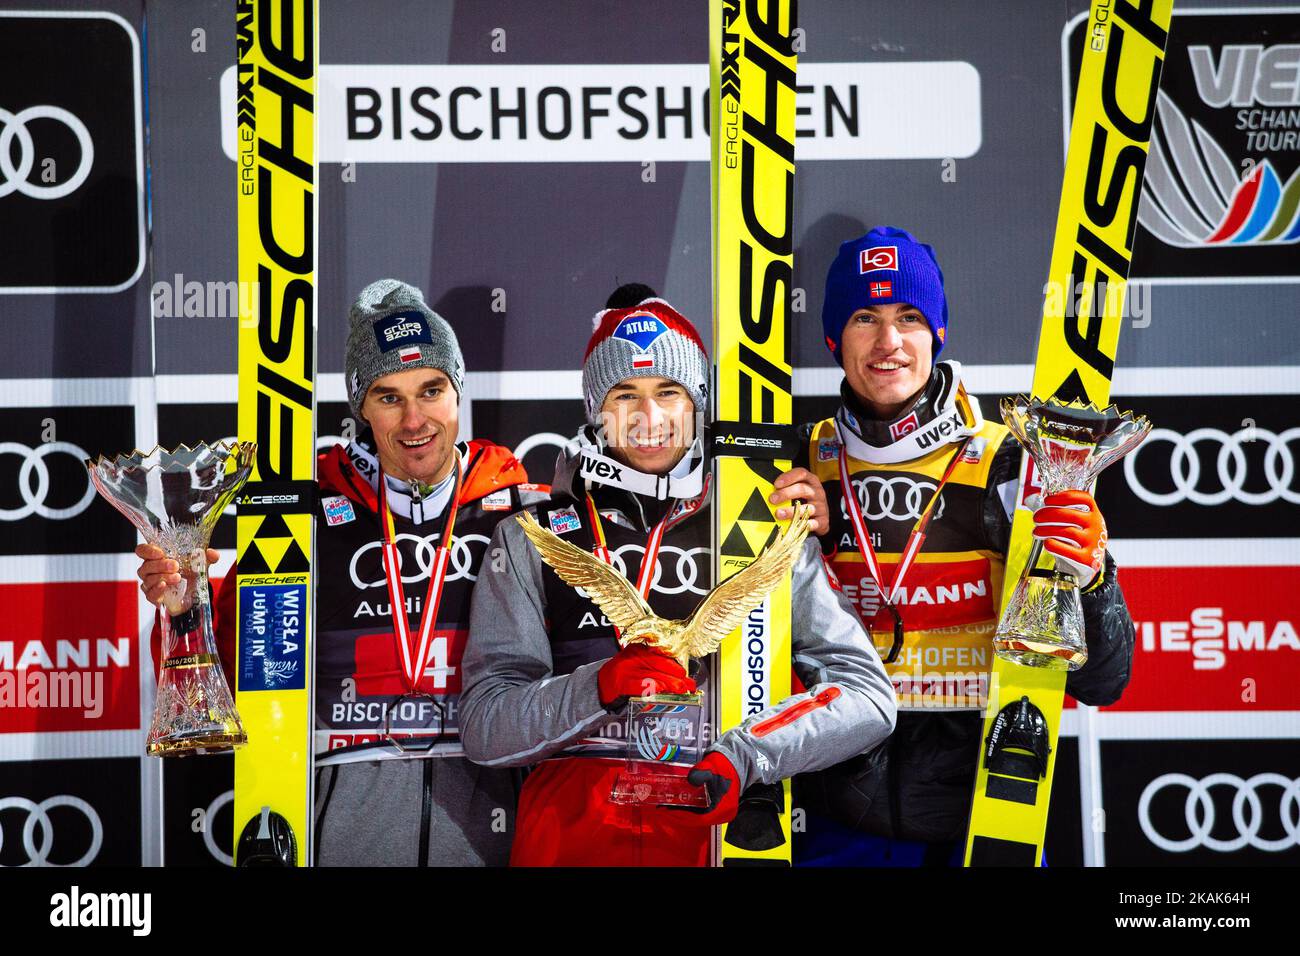 Kamil Stoch (C) of Poland celebrates winning the 65th Four Hills Tournament ski jumping event with Daniel Andre Tande (2nd Place, R) of Norway and Piotr Zyla (3rd Place, L) of Poland on Day 2 of the 65th Four Hills Tournament ski jumping event at Paul-Ausserleitner-Schanze on January 6, 2017 in Bischofshofen, Austria. (Photo by Damjan Zibert/NurPhoto) *** Please Use Credit from Credit Field *** Stock Photo